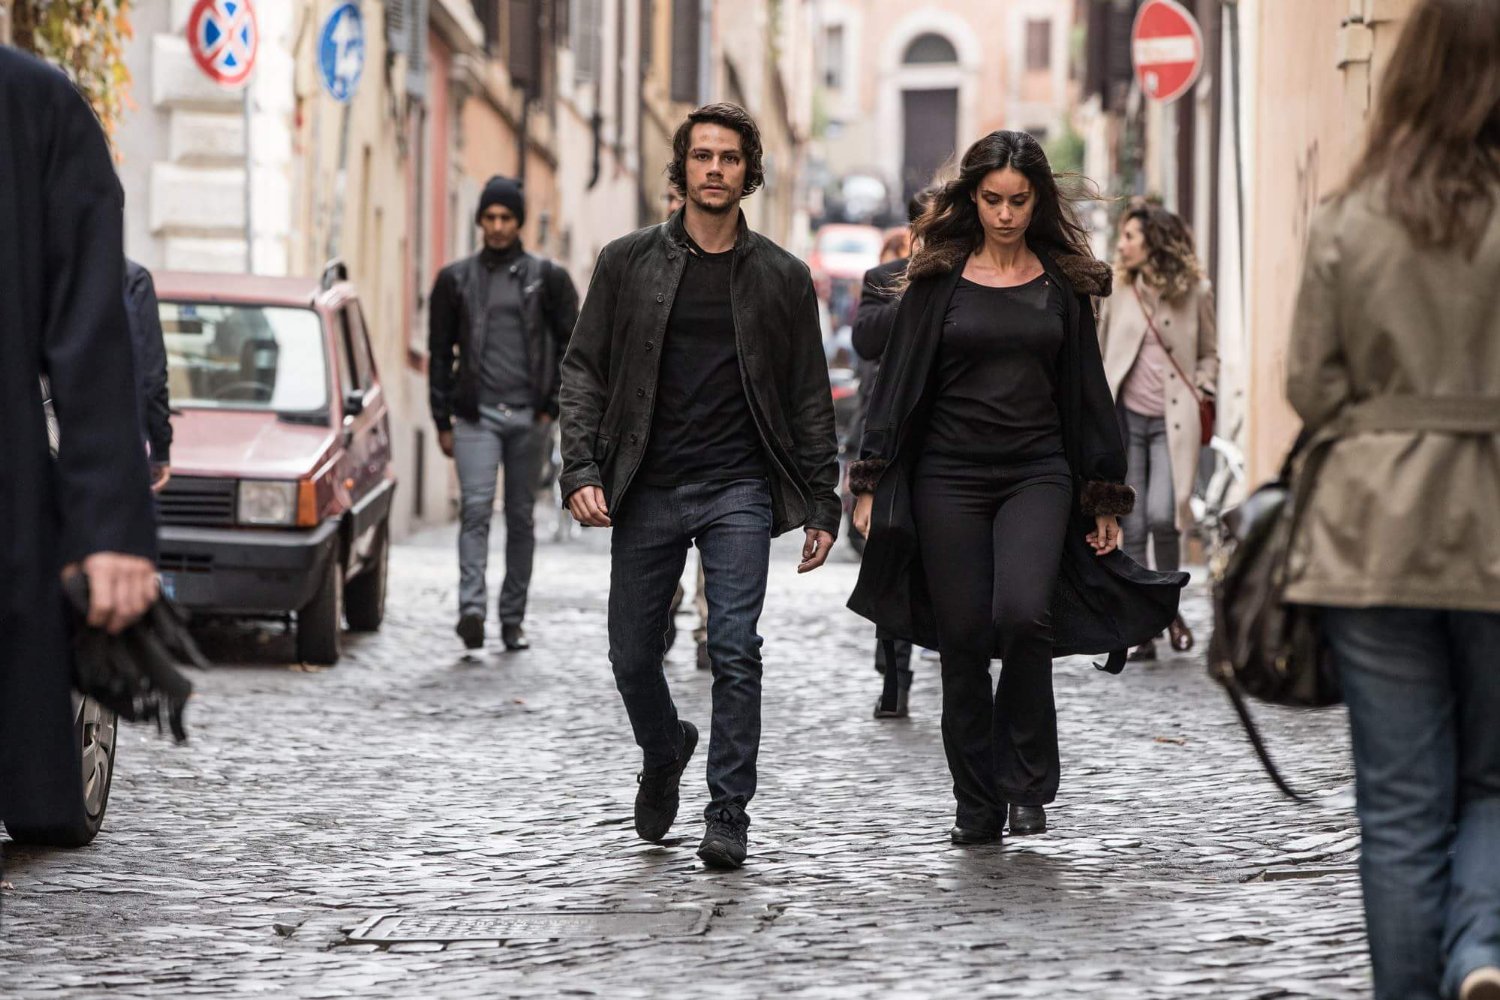 AMERICAN ASSASSIN Has Some Decent Action But a Hackneyed Story